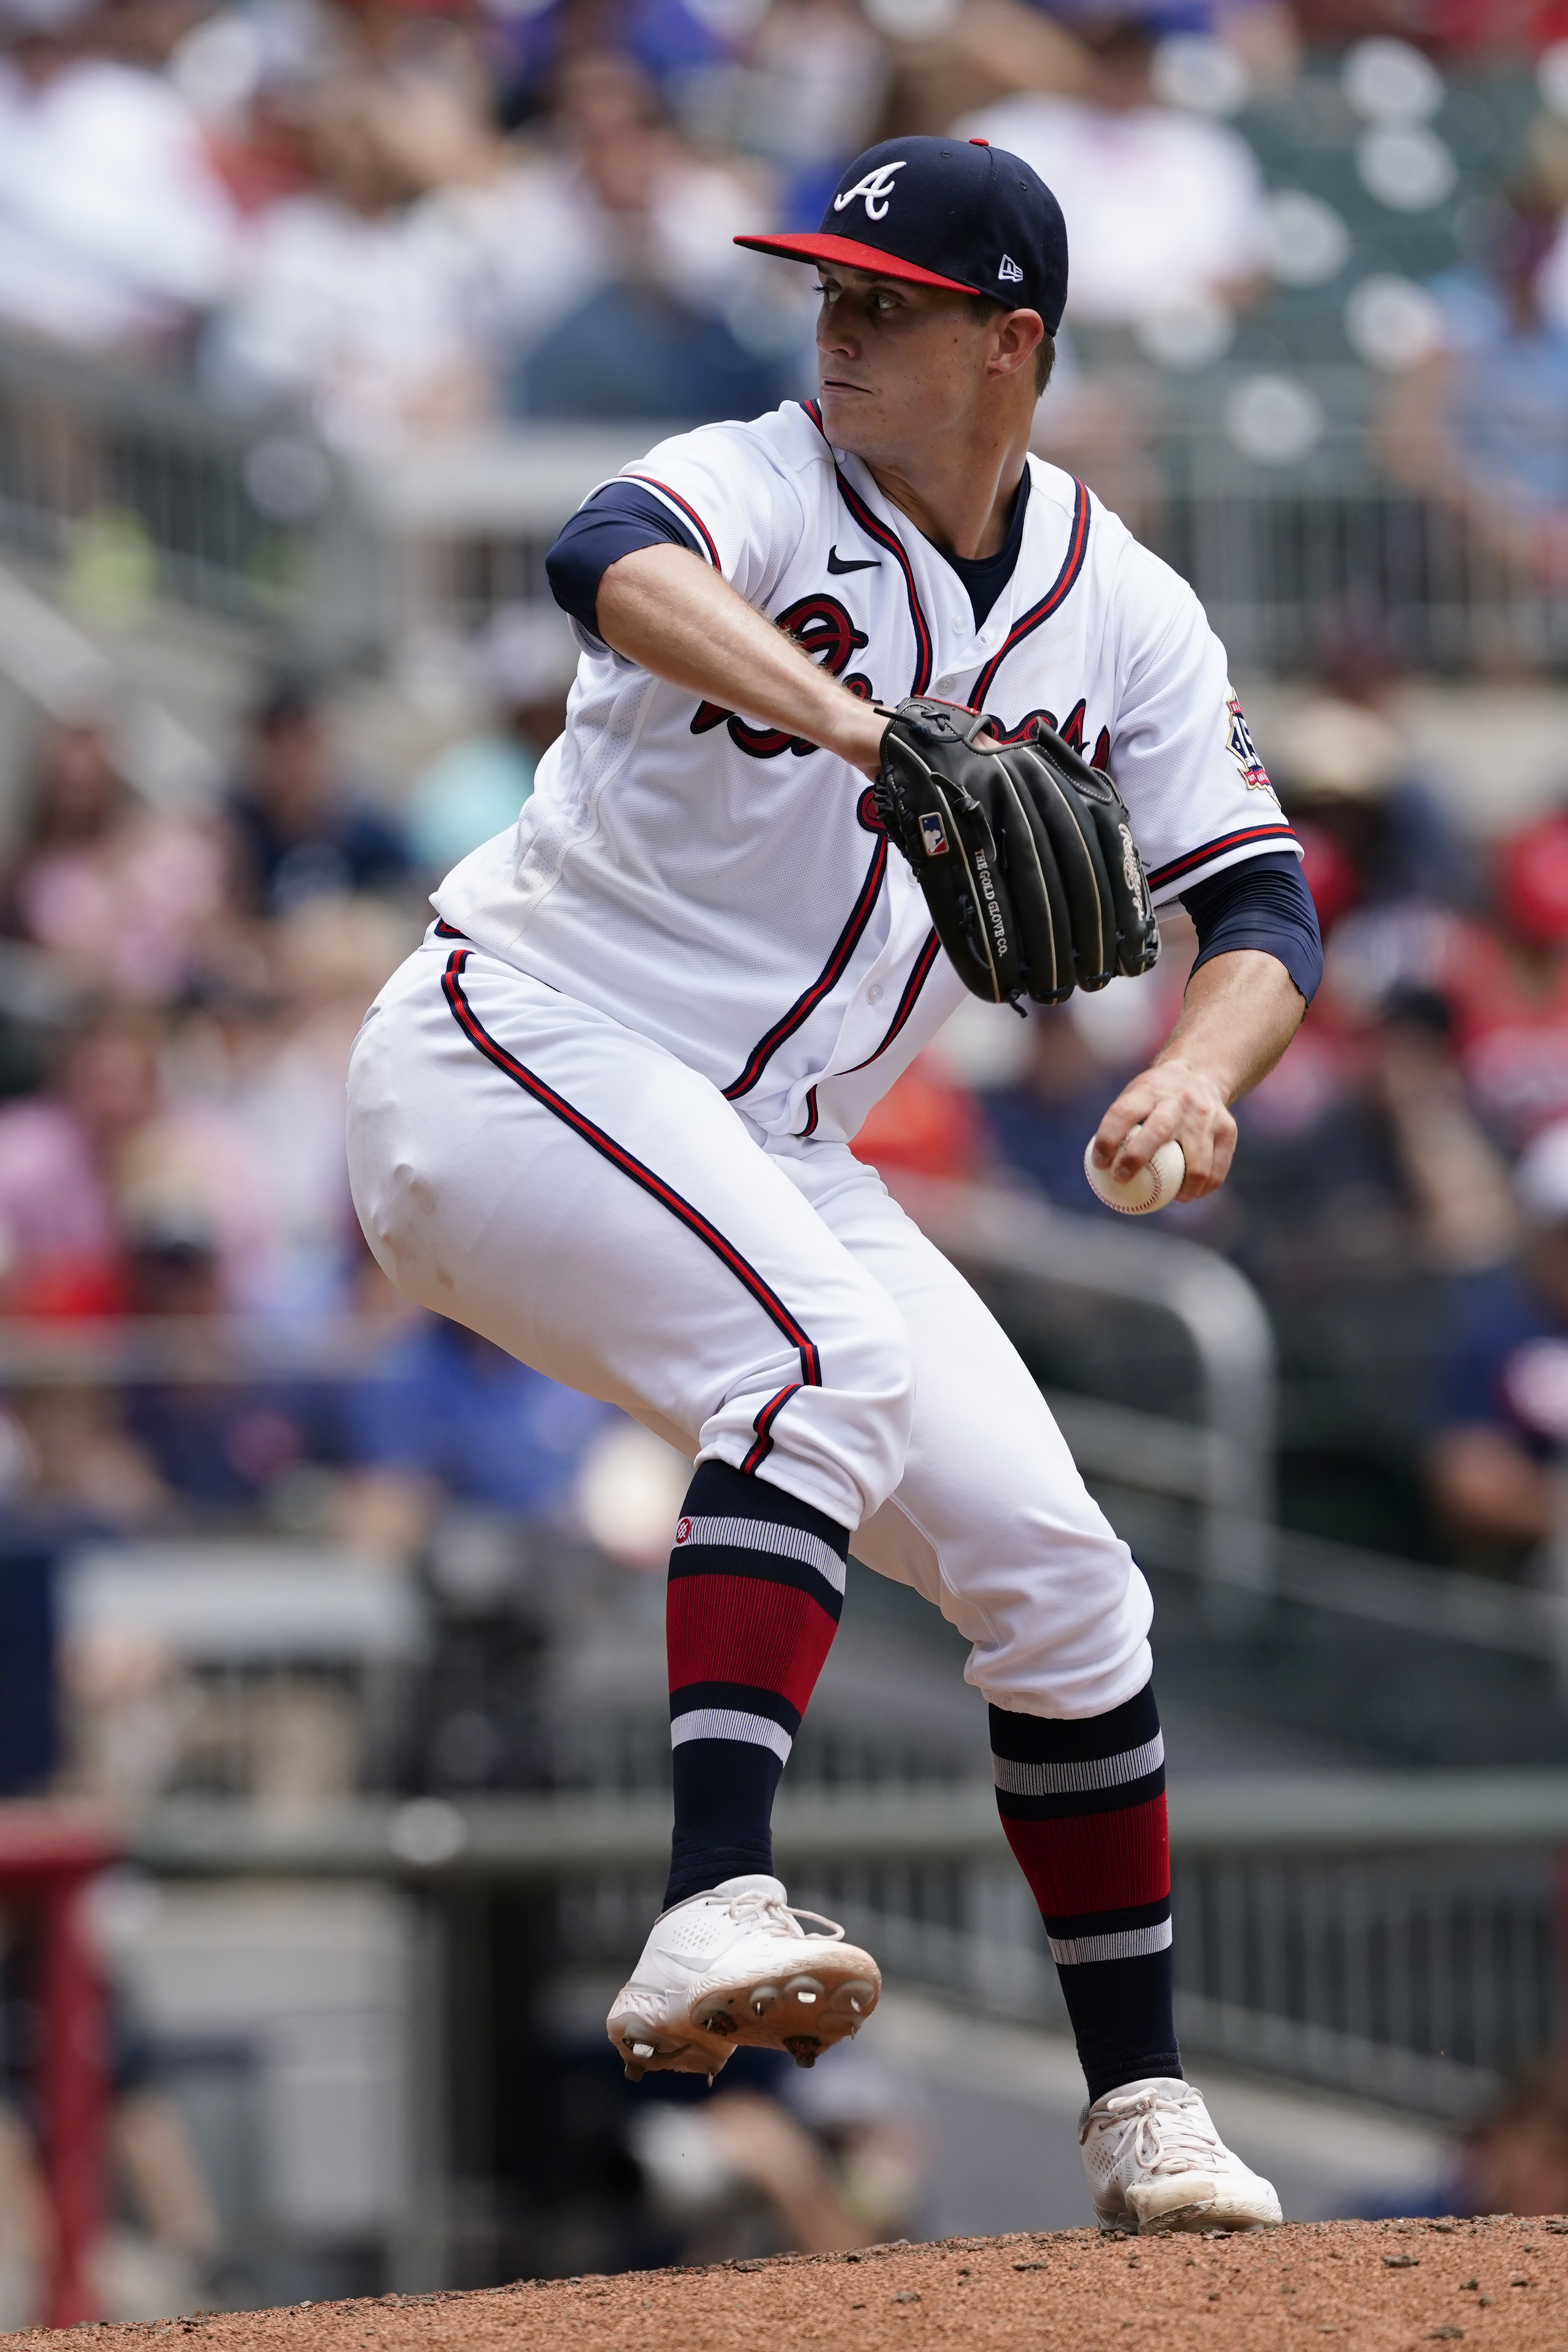 Swanson stays hot with 2-run HR as Braves top Nationals 5-0 – KGET 17